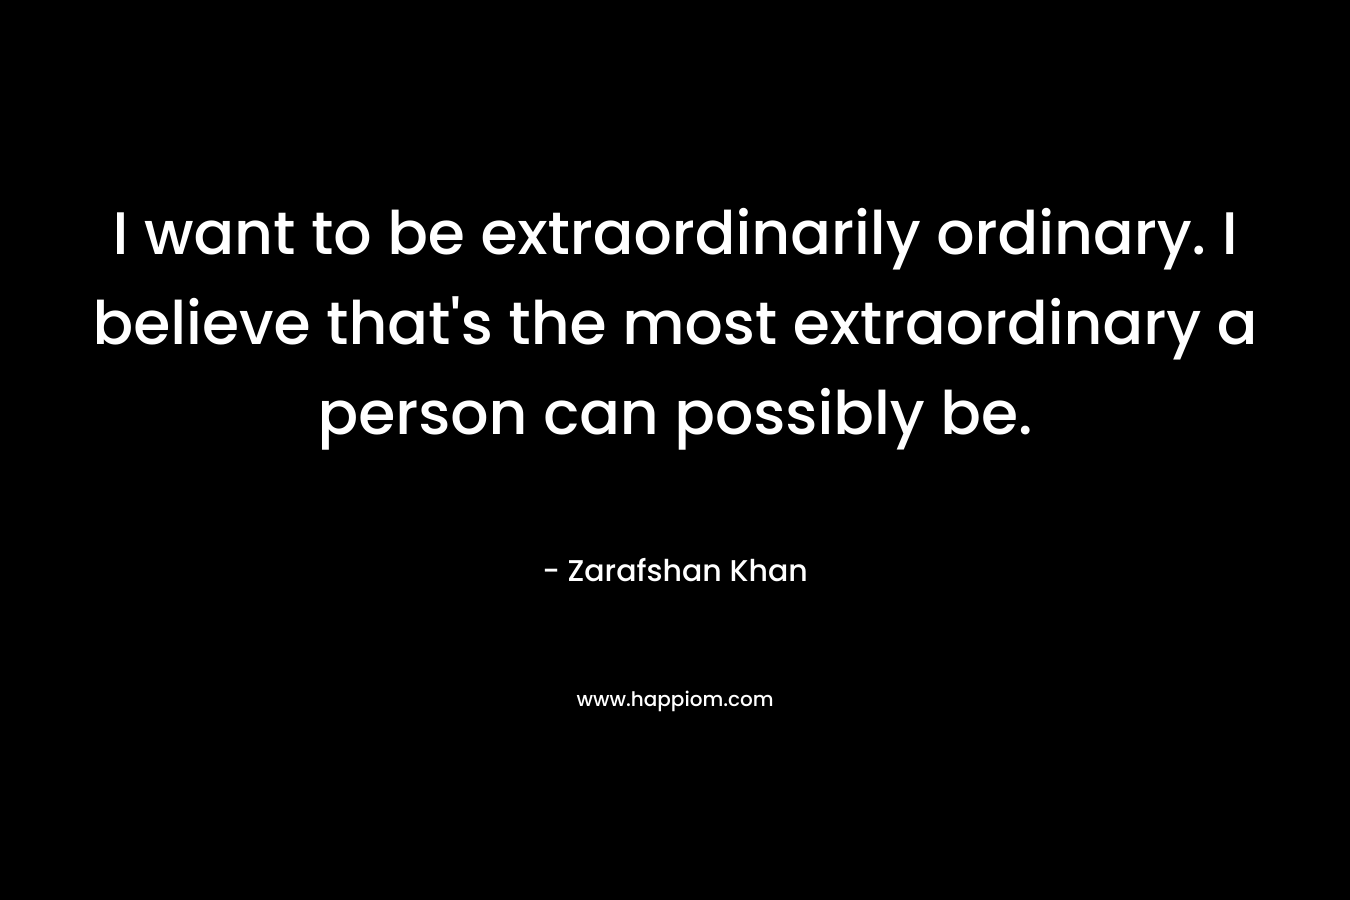 I want to be extraordinarily ordinary. I believe that’s the most extraordinary a person can possibly be. – Zarafshan Khan